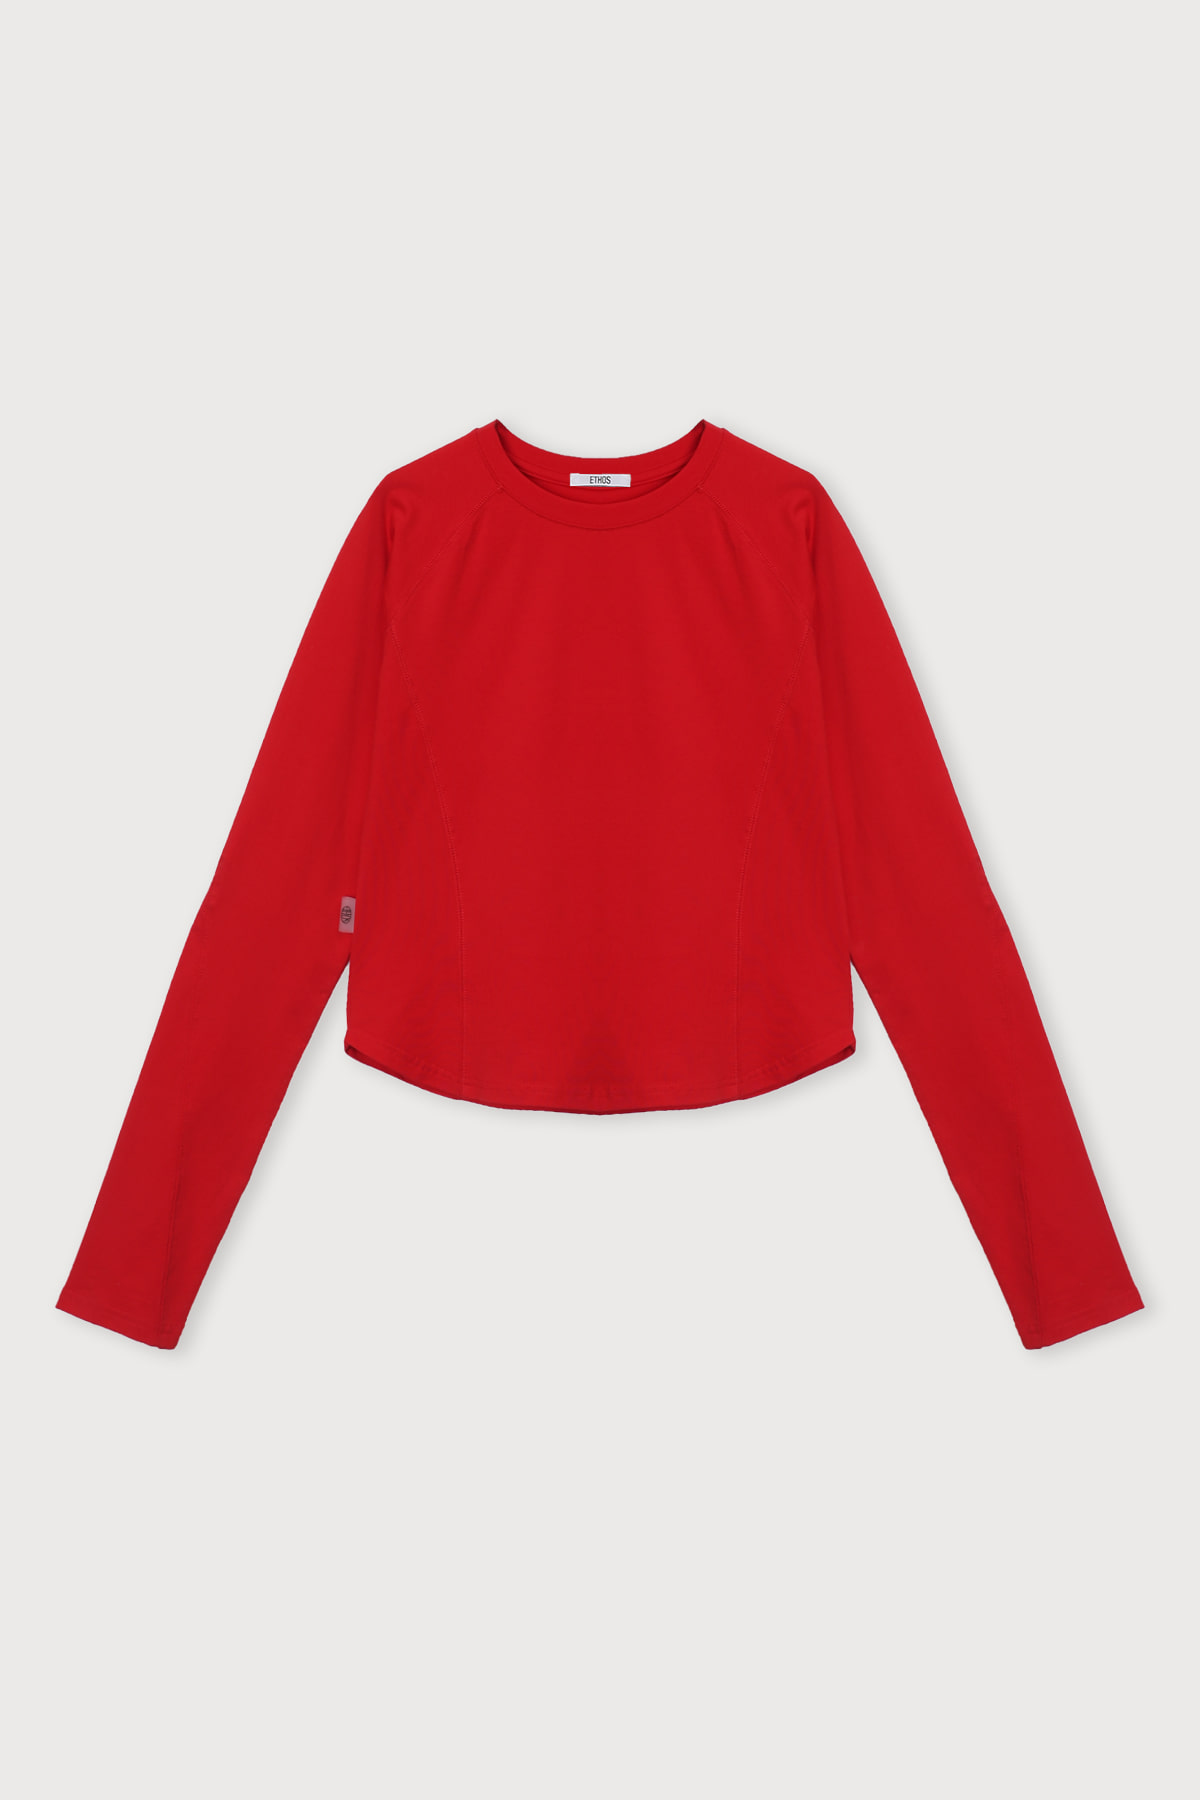 LINE SLEEVE TOP(RED)